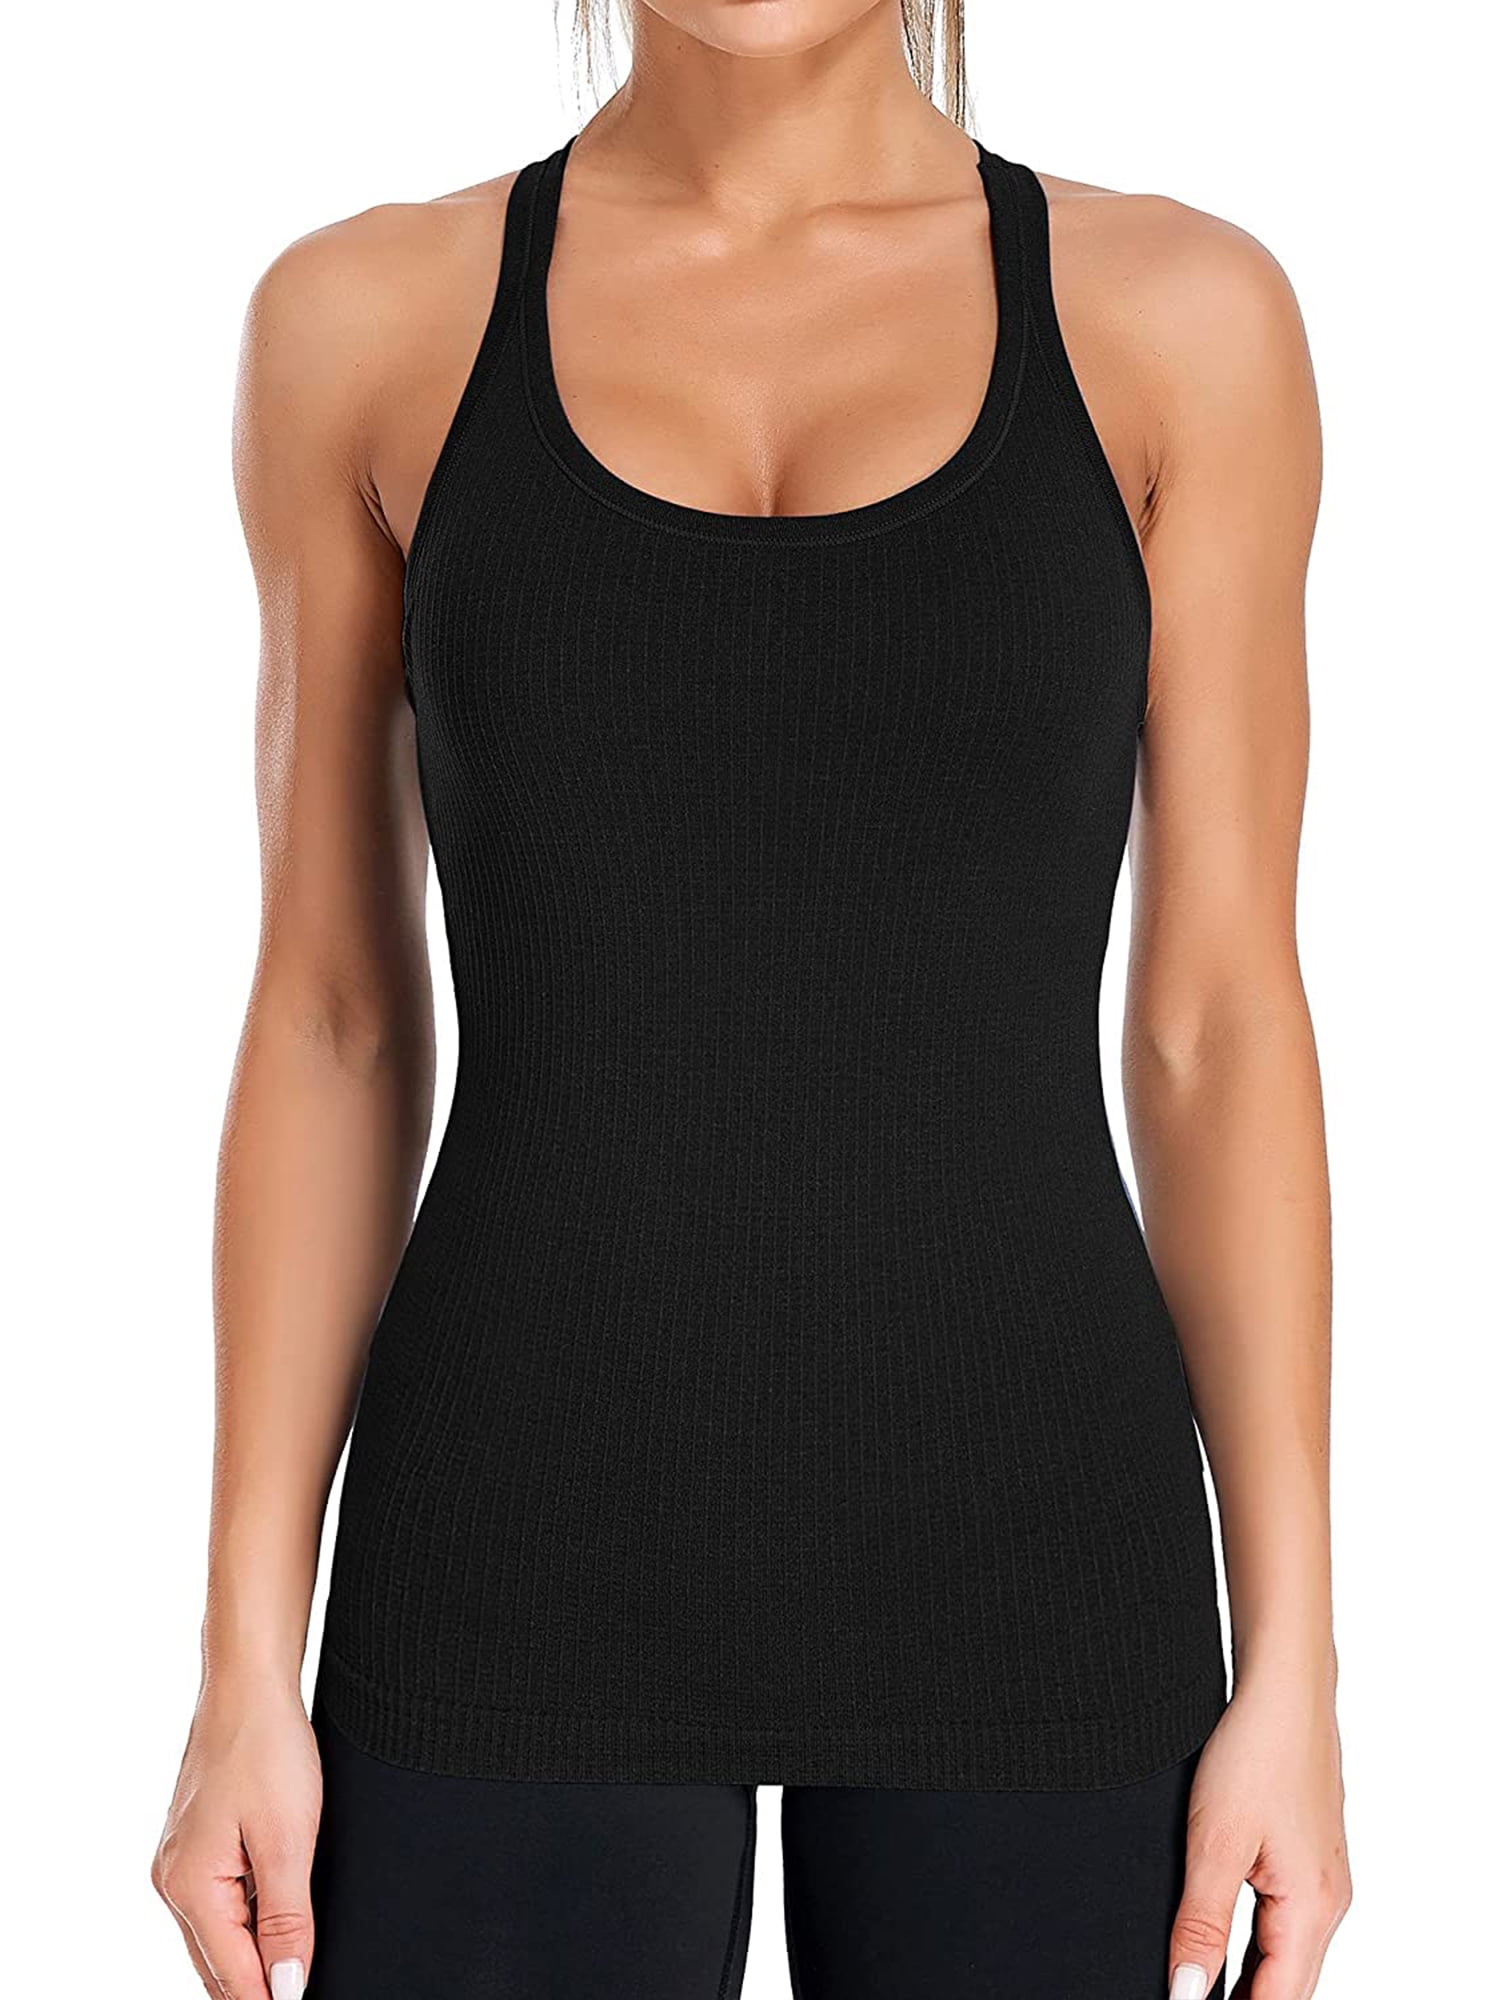 Women's Ribbed Camisole Workout Tank Tops with Built in Bra Basic  Undershirt 